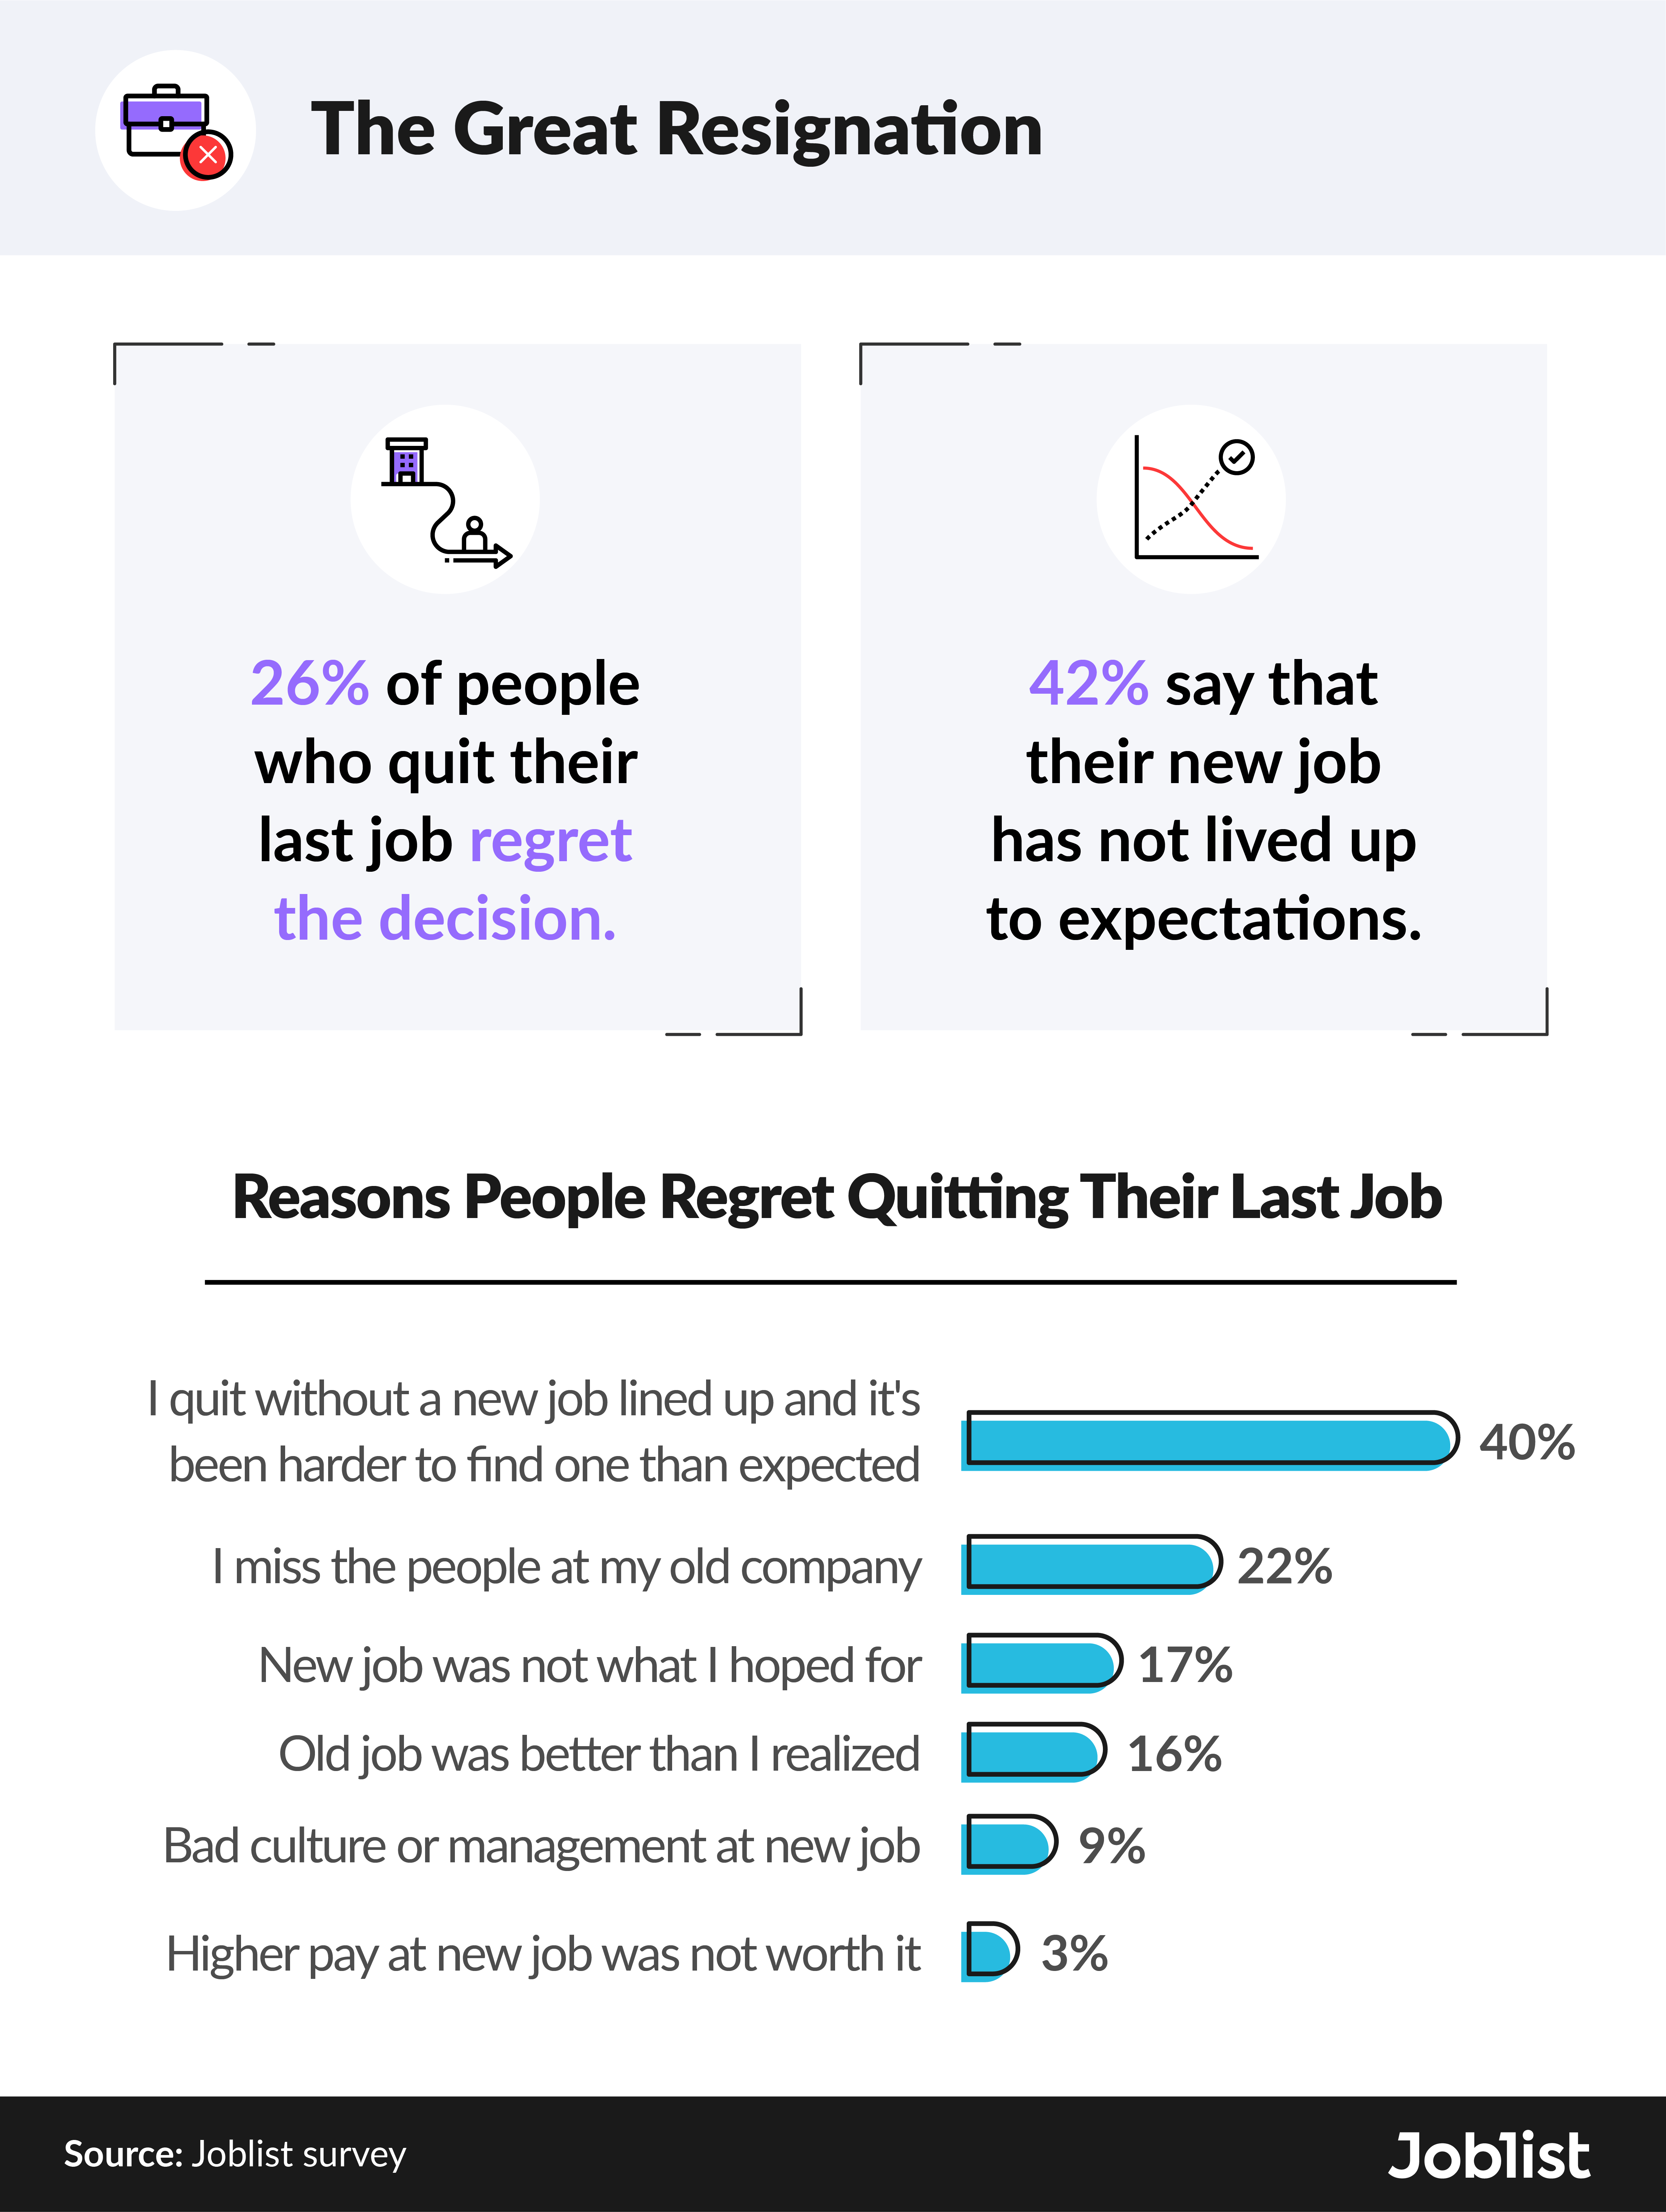 Reasons people regret quitting their last job during The Great Resignation